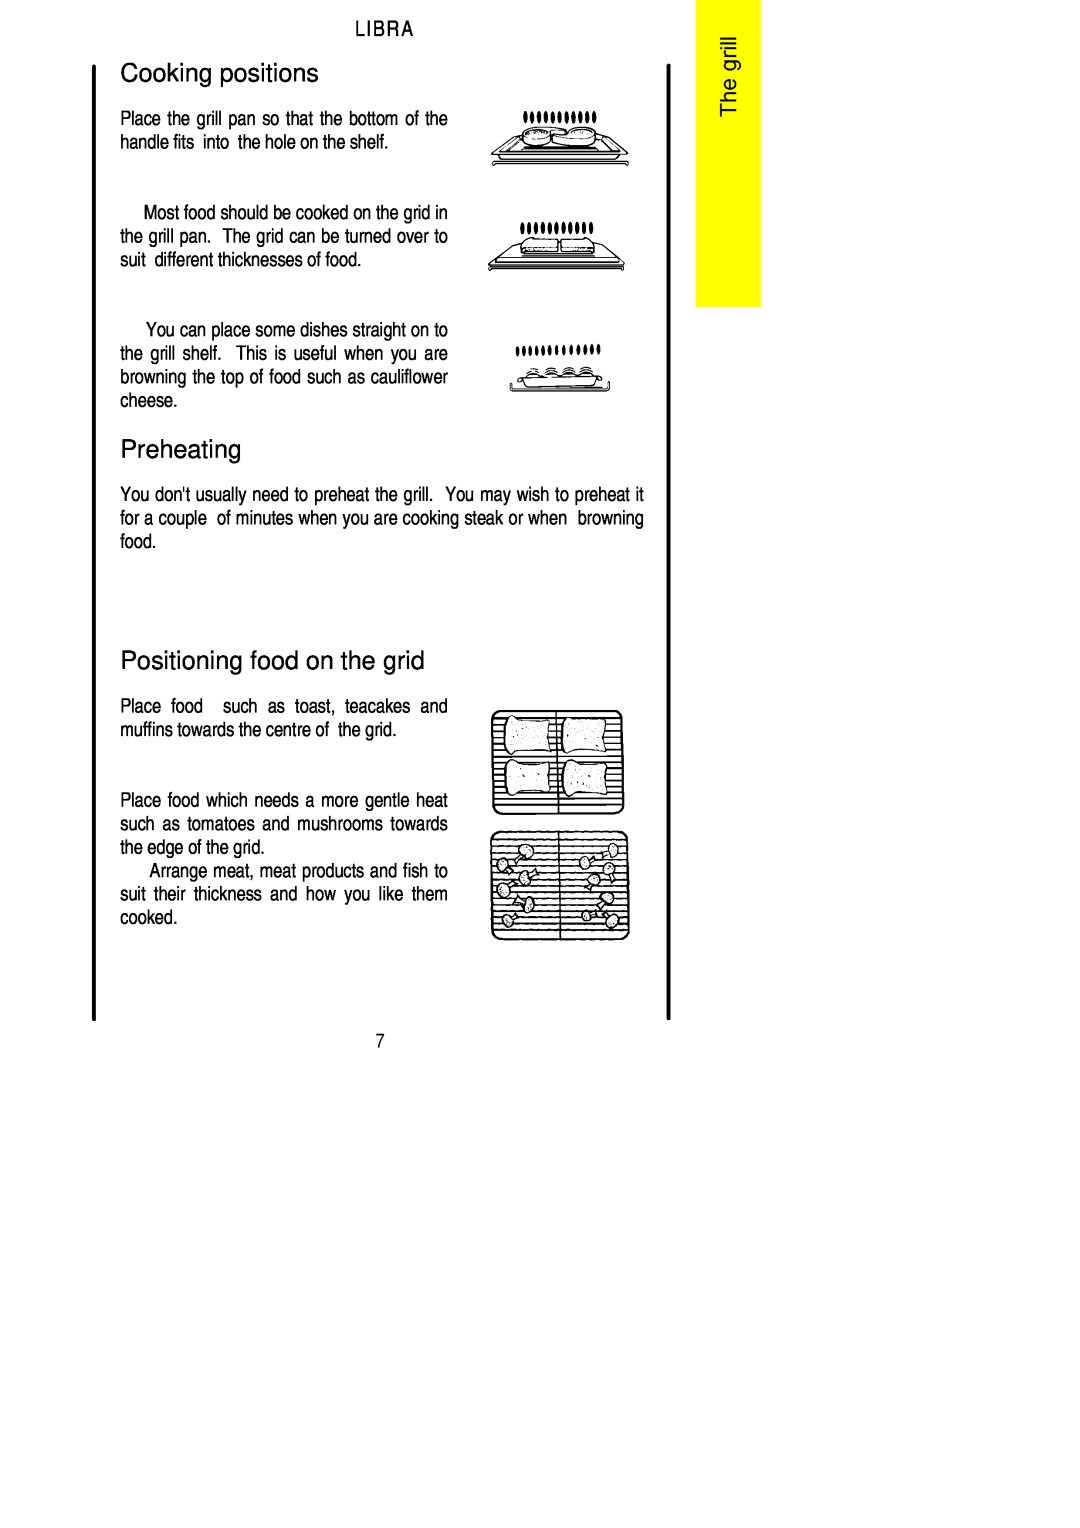 Parkinson Cowan Libra installation instructions Cooking positions, Preheating, Positioning food on the grid 